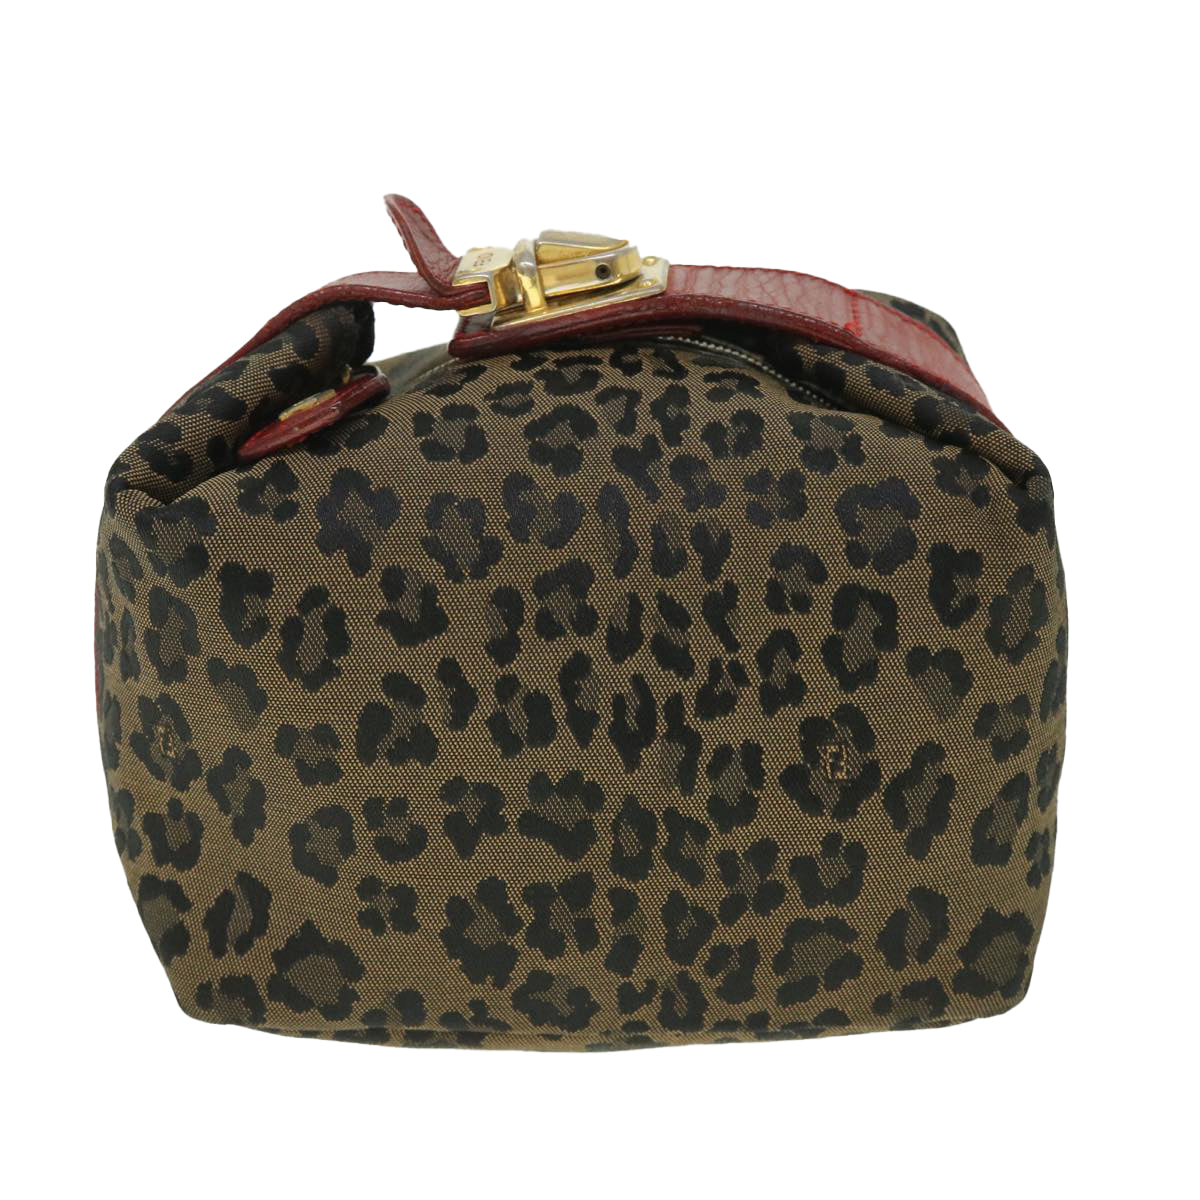 FENDI Leopard Hand Bag Brown Red Auth 55755